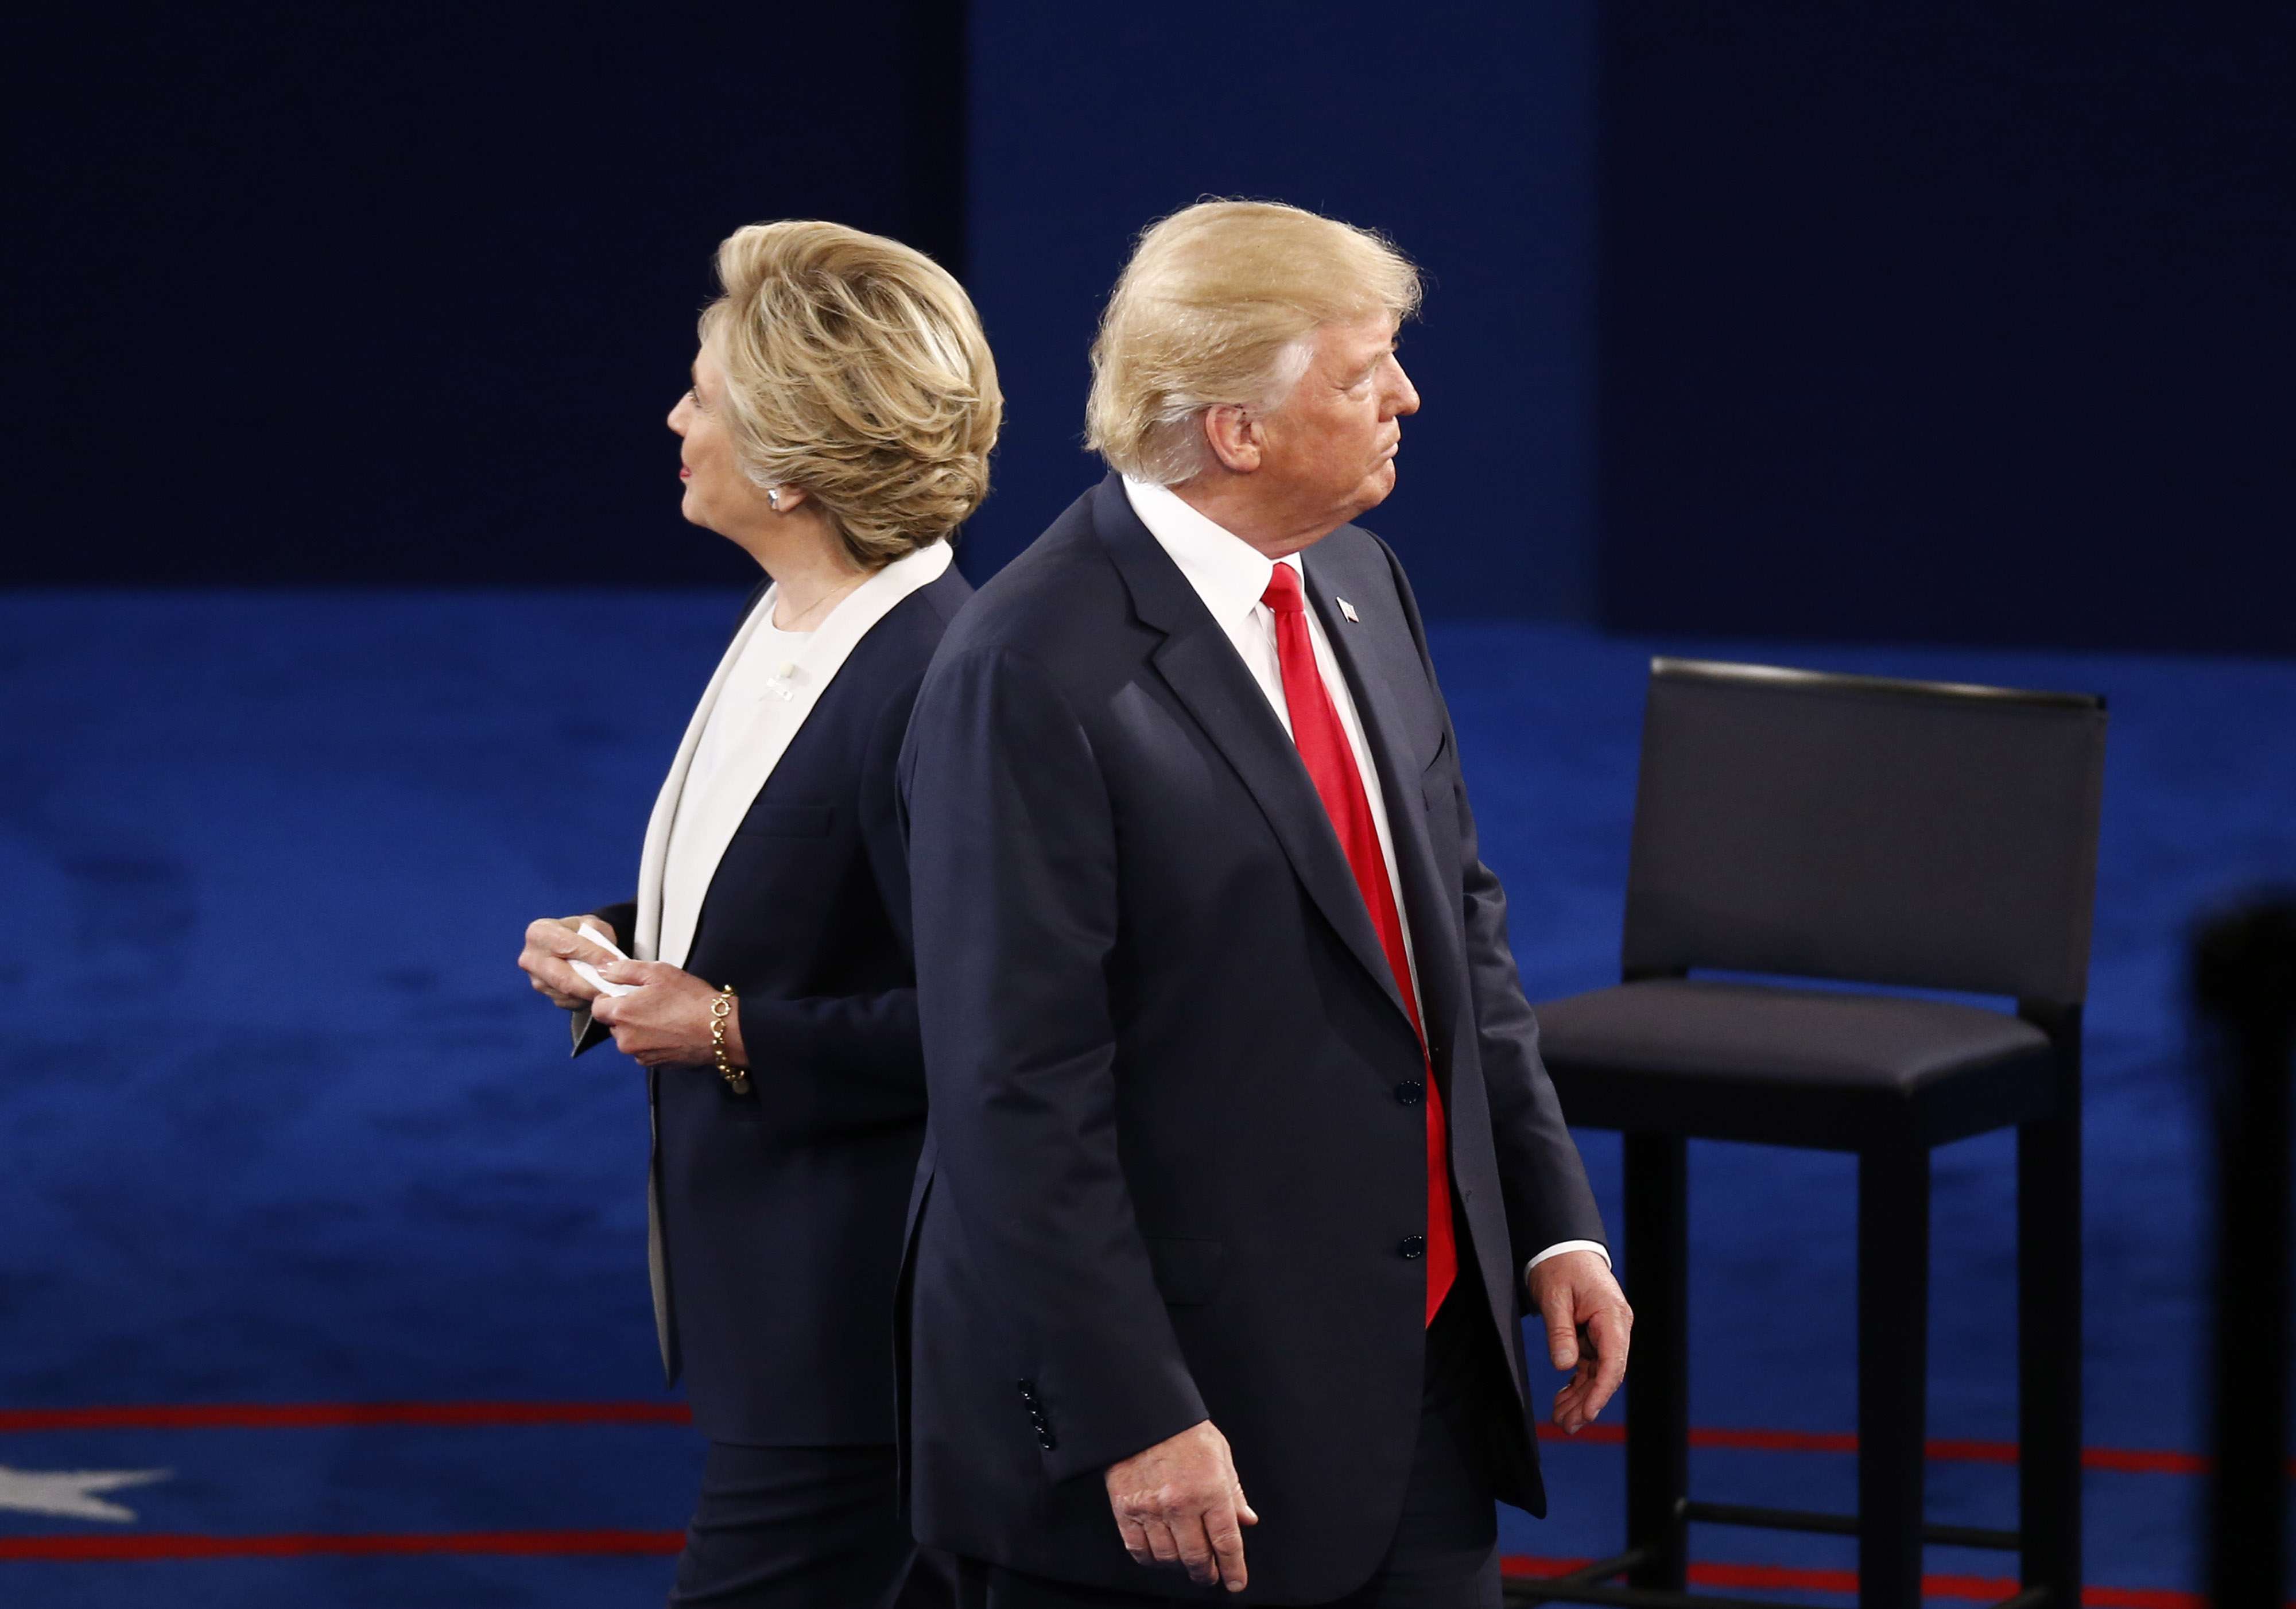 Republican Donald Trump and Democrat Hillary Clinton during the second presidential debate at Washington University in Missouri. Photo: Bloomberg